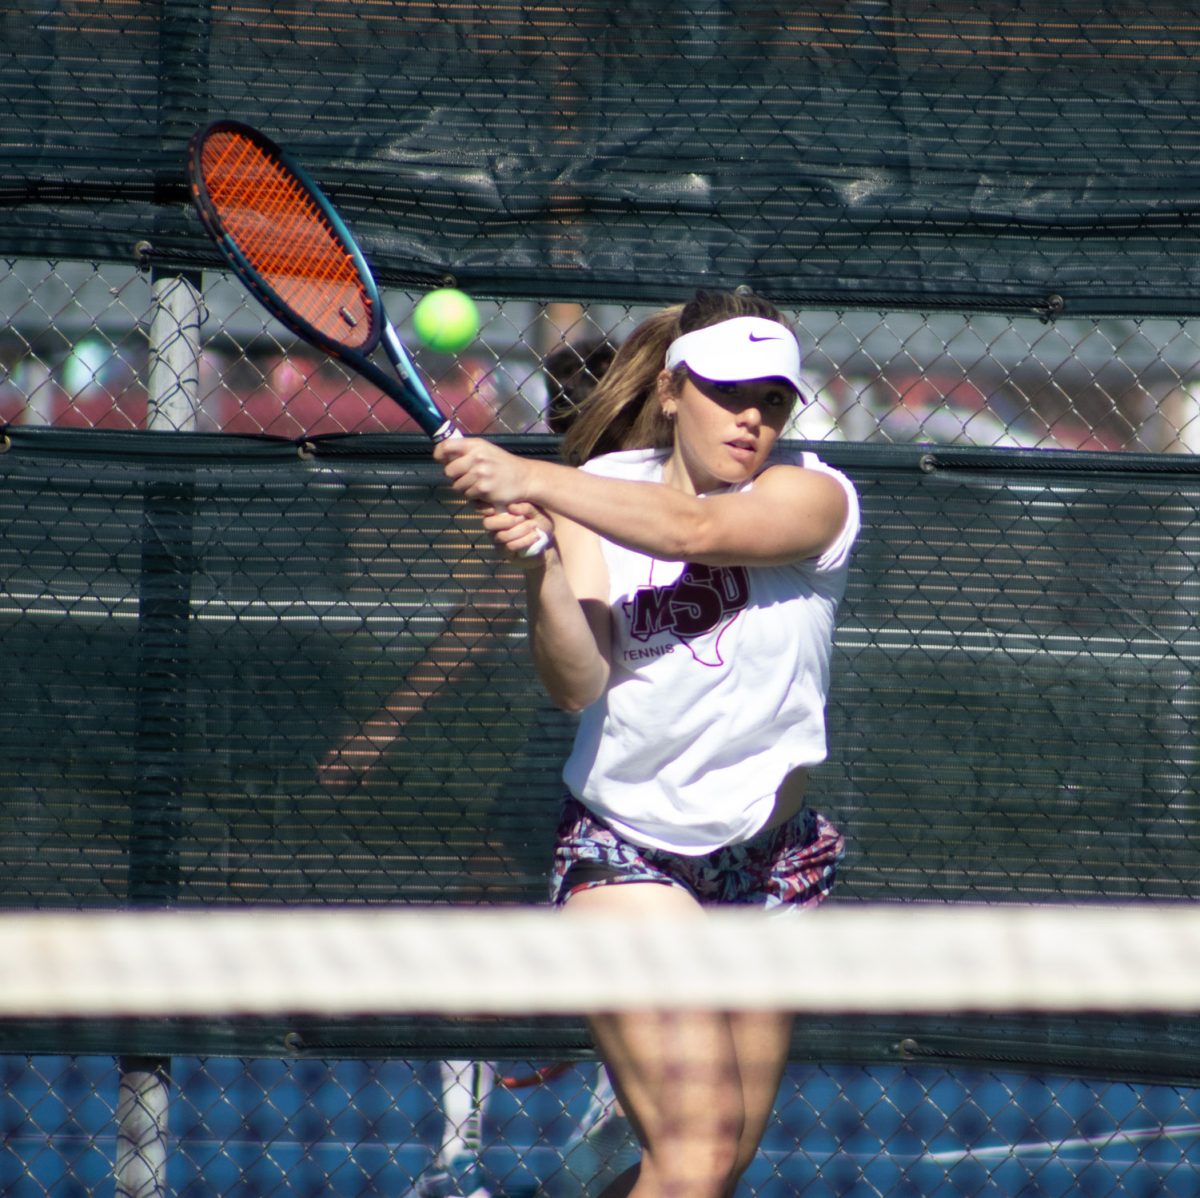 Sydney Williams, winds up for a hit during practice, Feb. 3. The tennis season will begin on Feb. 8.